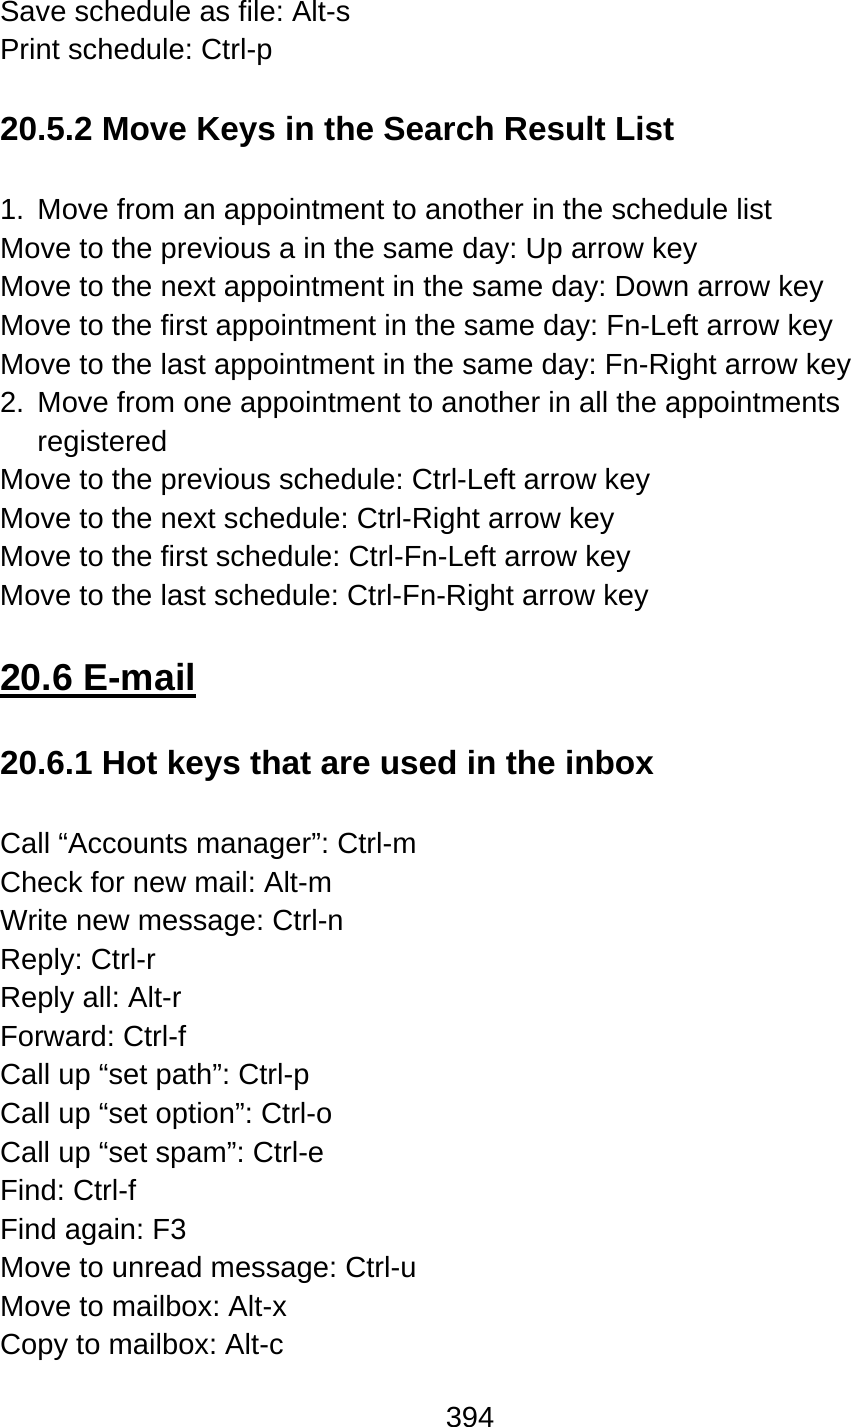 394  Save schedule as file: Alt-s Print schedule: Ctrl-p  20.5.2 Move Keys in the Search Result List  1.  Move from an appointment to another in the schedule list Move to the previous a in the same day: Up arrow key Move to the next appointment in the same day: Down arrow key Move to the first appointment in the same day: Fn-Left arrow key Move to the last appointment in the same day: Fn-Right arrow key 2.  Move from one appointment to another in all the appointments registered Move to the previous schedule: Ctrl-Left arrow key Move to the next schedule: Ctrl-Right arrow key Move to the first schedule: Ctrl-Fn-Left arrow key Move to the last schedule: Ctrl-Fn-Right arrow key  20.6 E-mail  20.6.1 Hot keys that are used in the inbox  Call “Accounts manager”: Ctrl-m   Check for new mail: Alt-m Write new message: Ctrl-n Reply: Ctrl-r Reply all: Alt-r Forward: Ctrl-f Call up “set path”: Ctrl-p Call up “set option”: Ctrl-o Call up “set spam”: Ctrl-e Find: Ctrl-f Find again: F3 Move to unread message: Ctrl-u Move to mailbox: Alt-x Copy to mailbox: Alt-c 